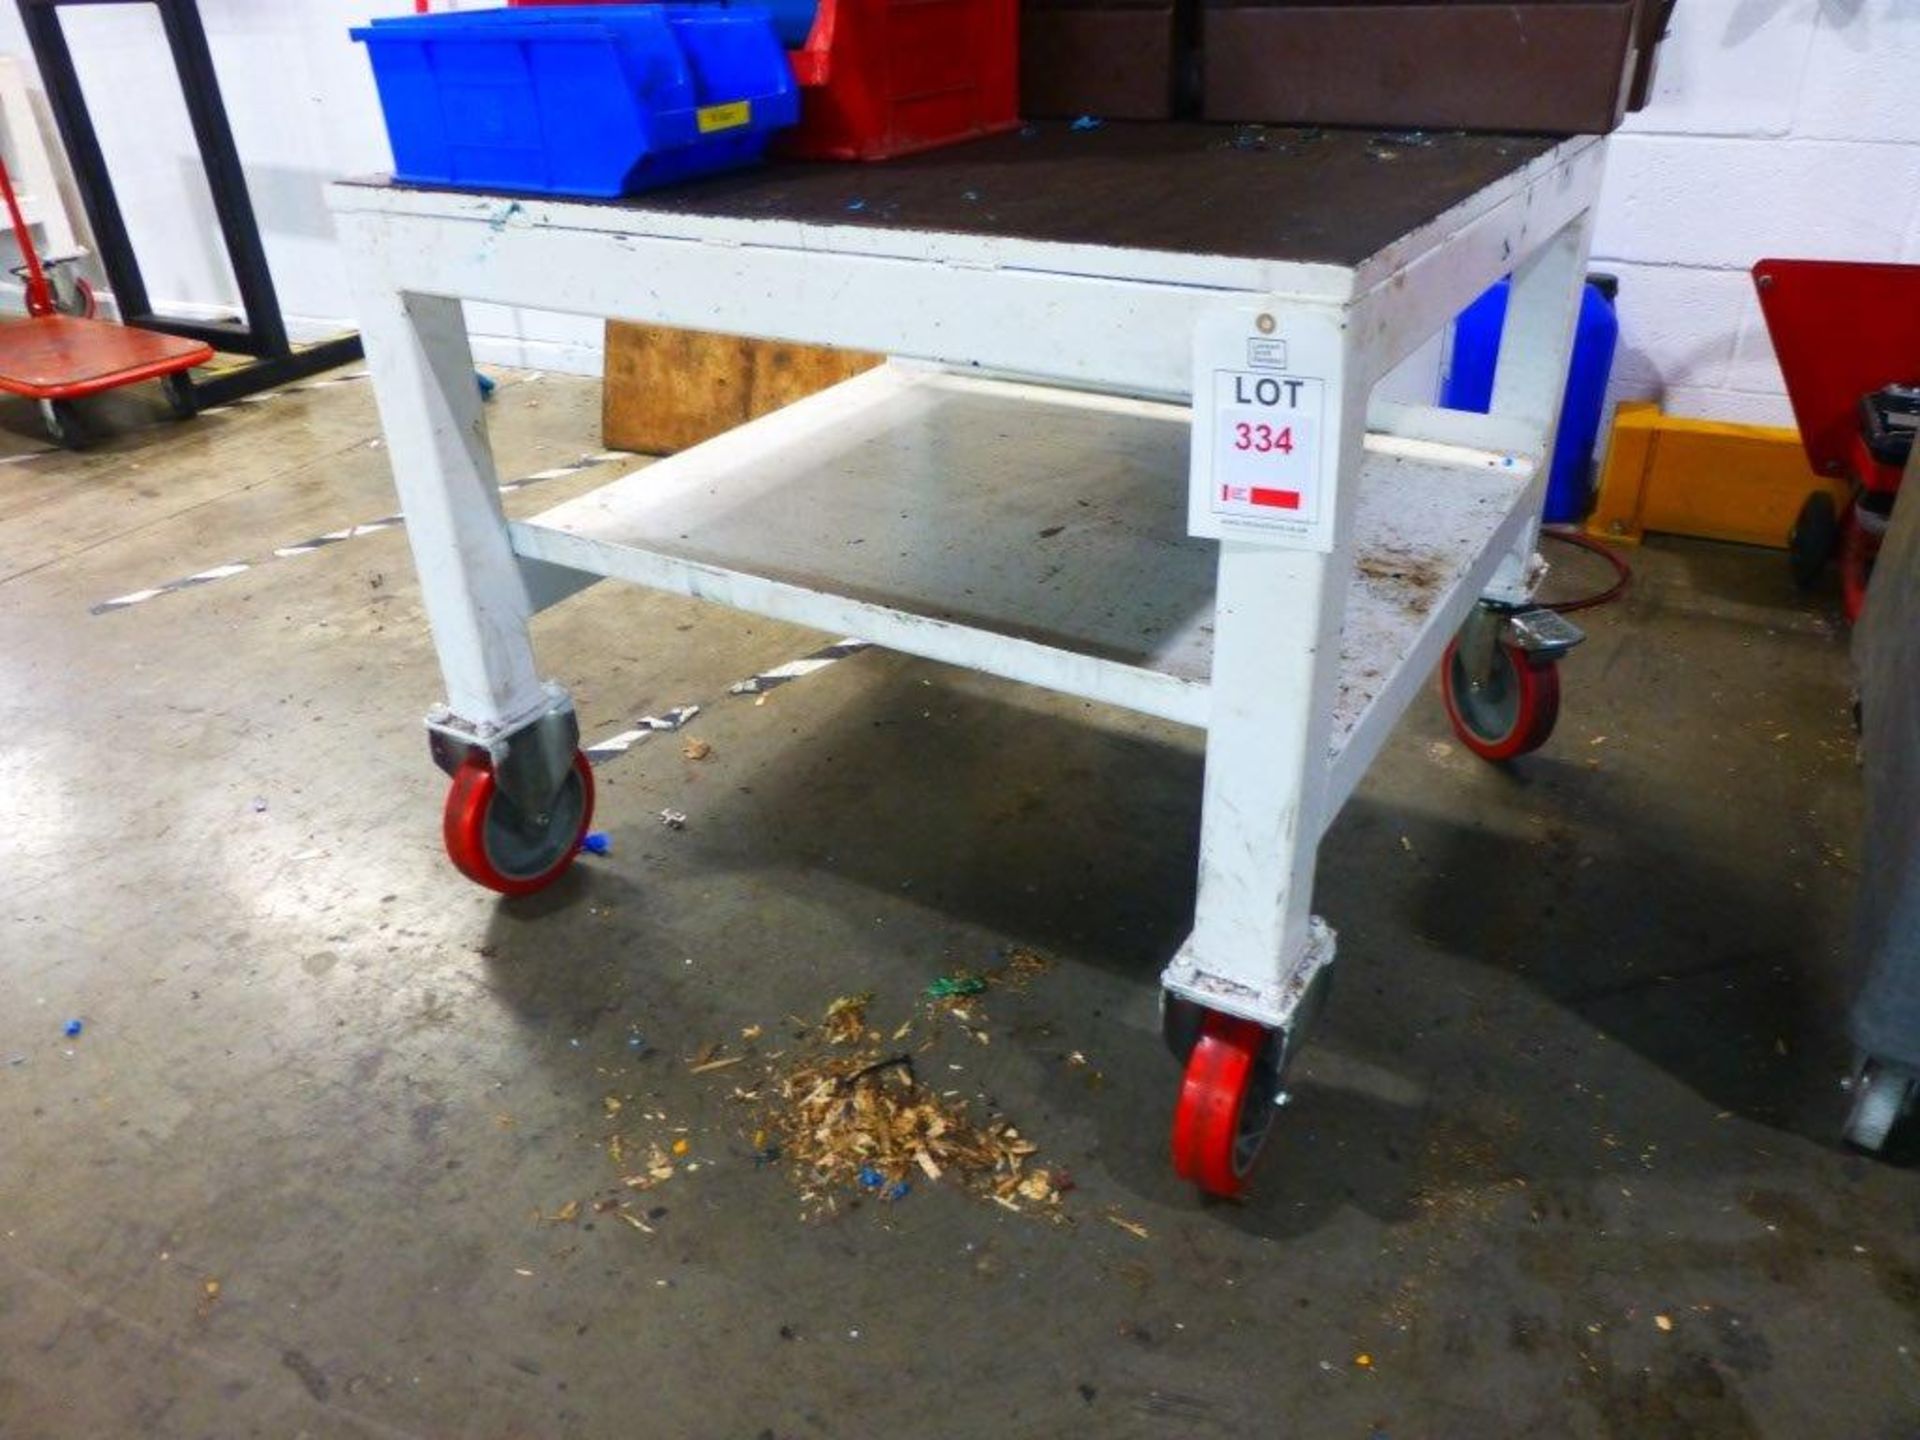 1000mm x 1000mm x 860mm heavy duty mobile work table, contents not included